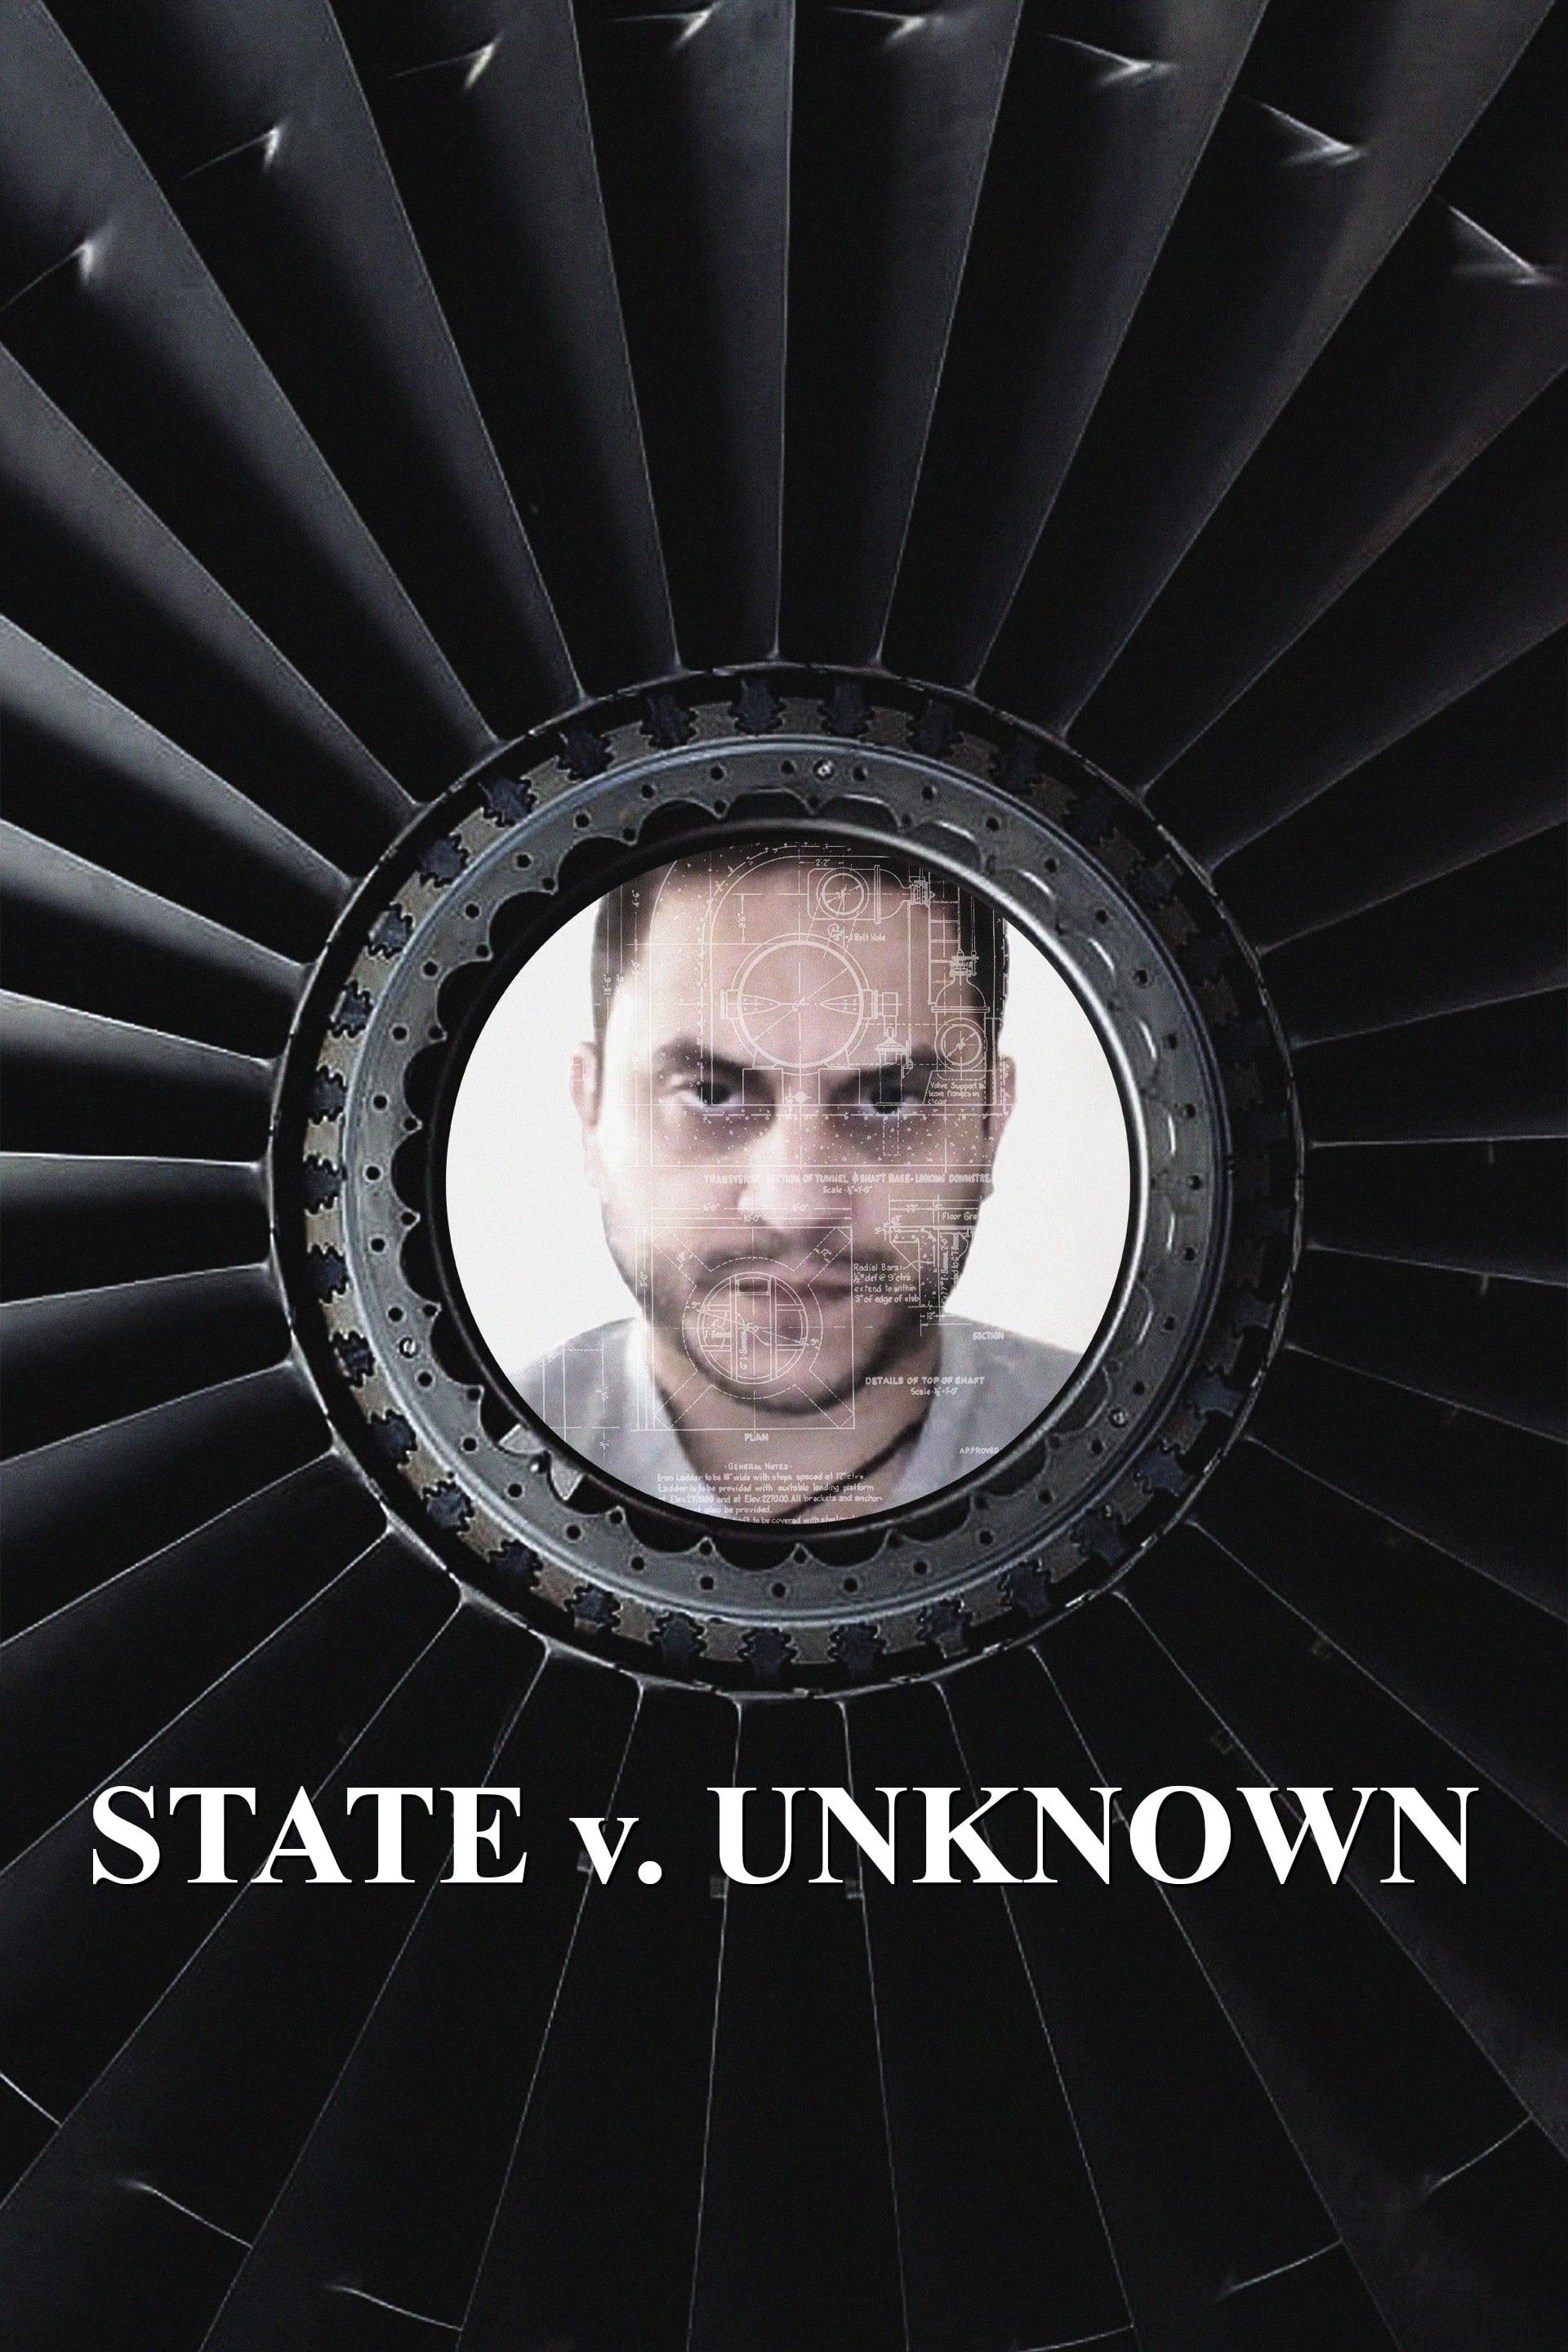 State v. Unknown poster